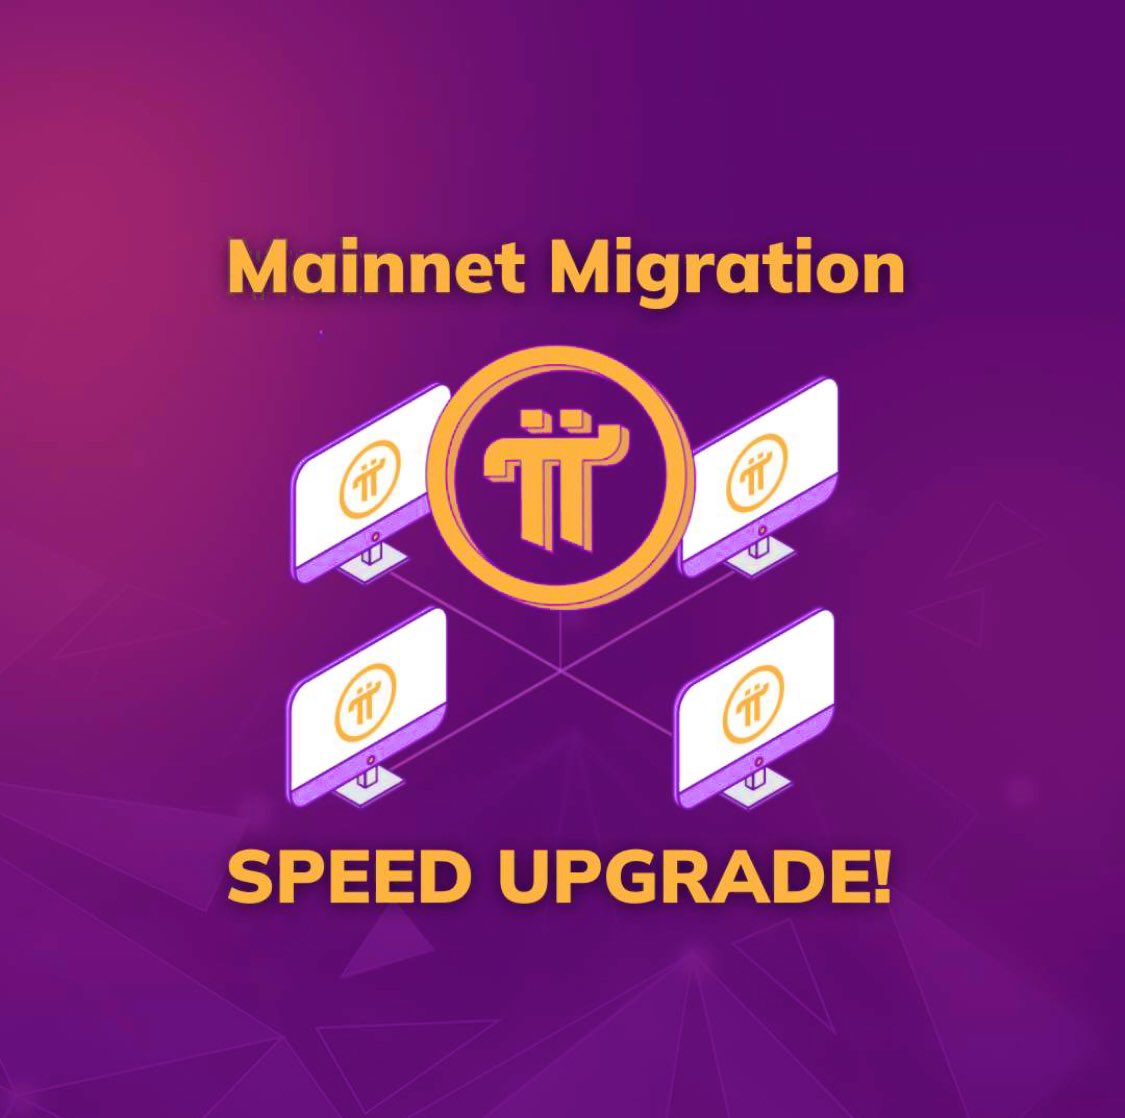 🚨New update : We are thrilled to announce that the Core Team has made a major technical upgrade in the Mainnet migration mechanism that resulted in more than DOUBLE the speed at which Pioneers migrate to the Mainnet! #PiNetwork